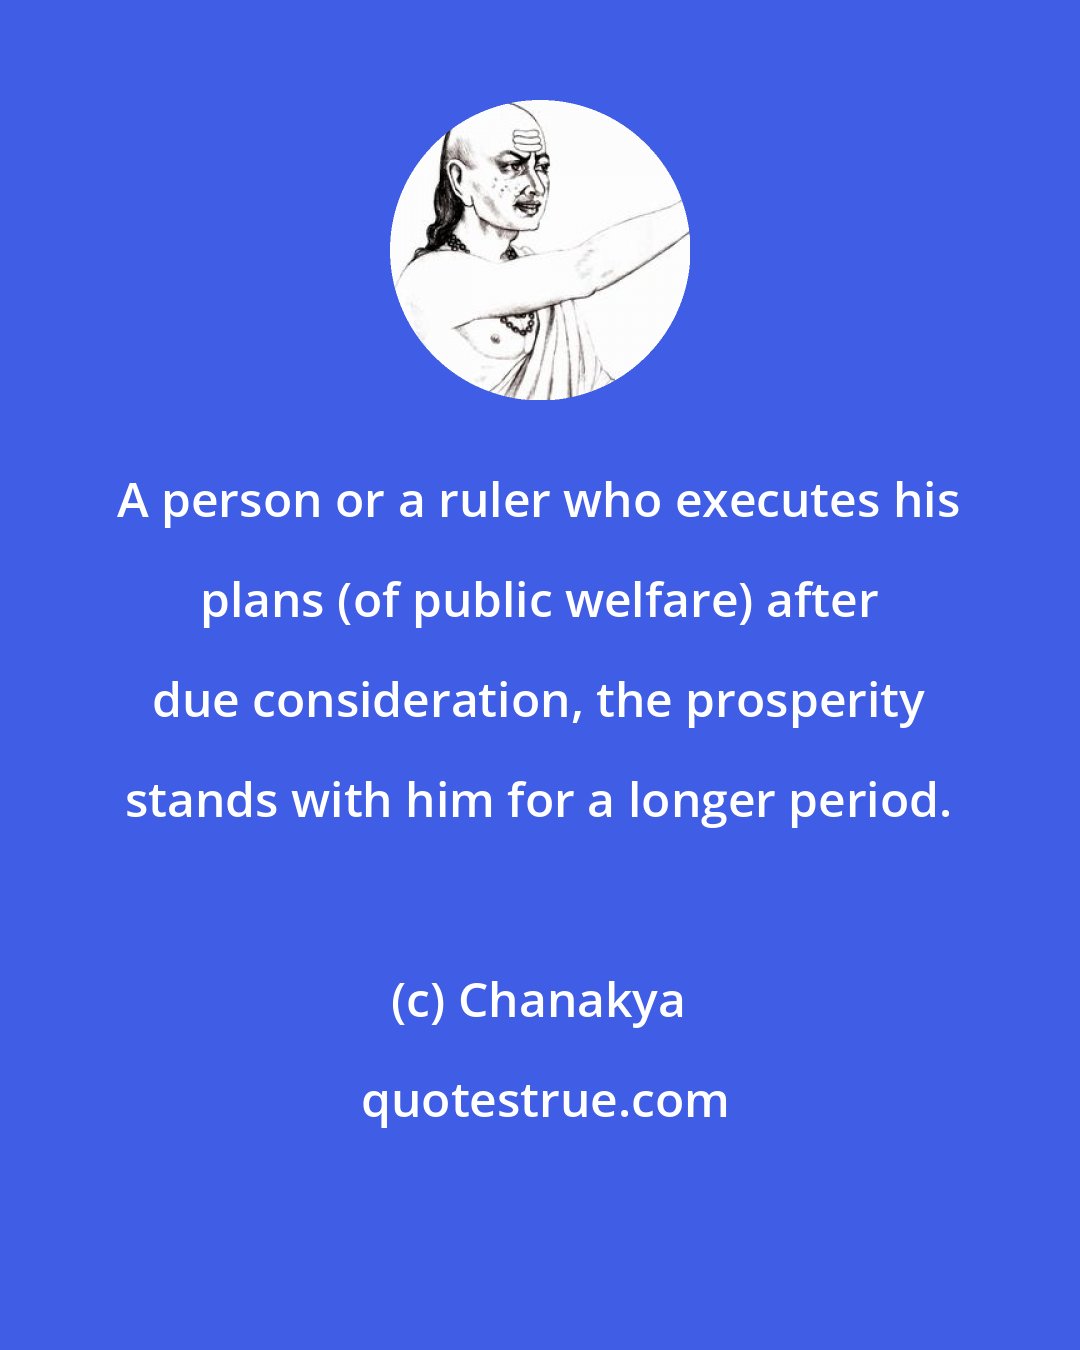 Chanakya: A person or a ruler who executes his plans (of public welfare) after due consideration, the prosperity stands with him for a longer period.